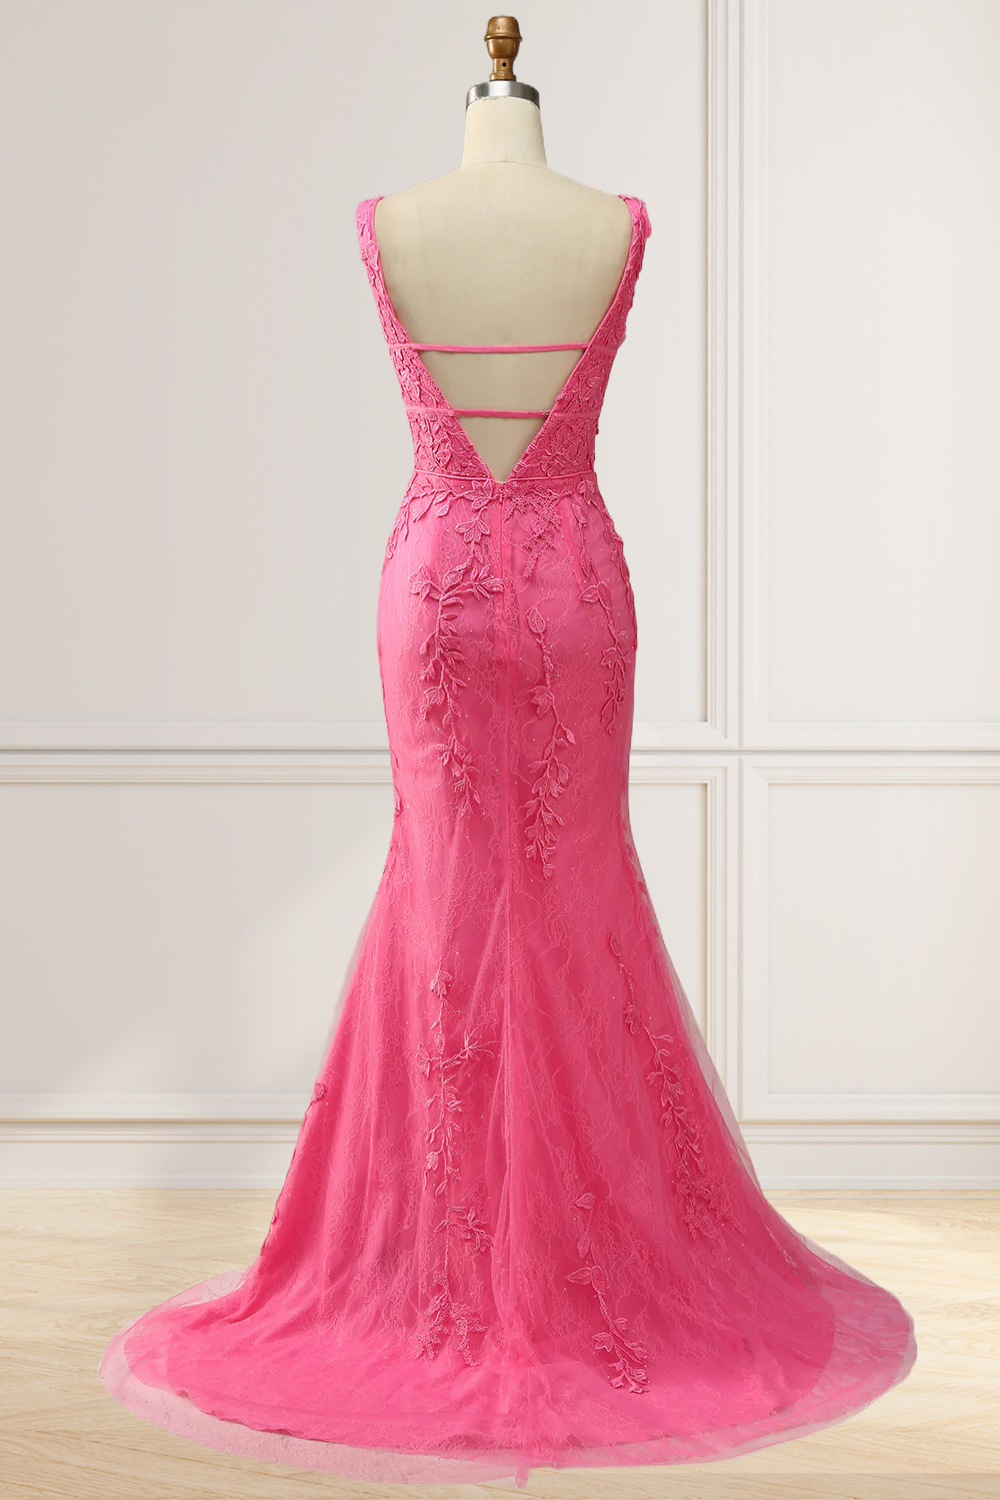 Dressime Mermaid Lace V Neck Prom Dresses With Applique And Sash